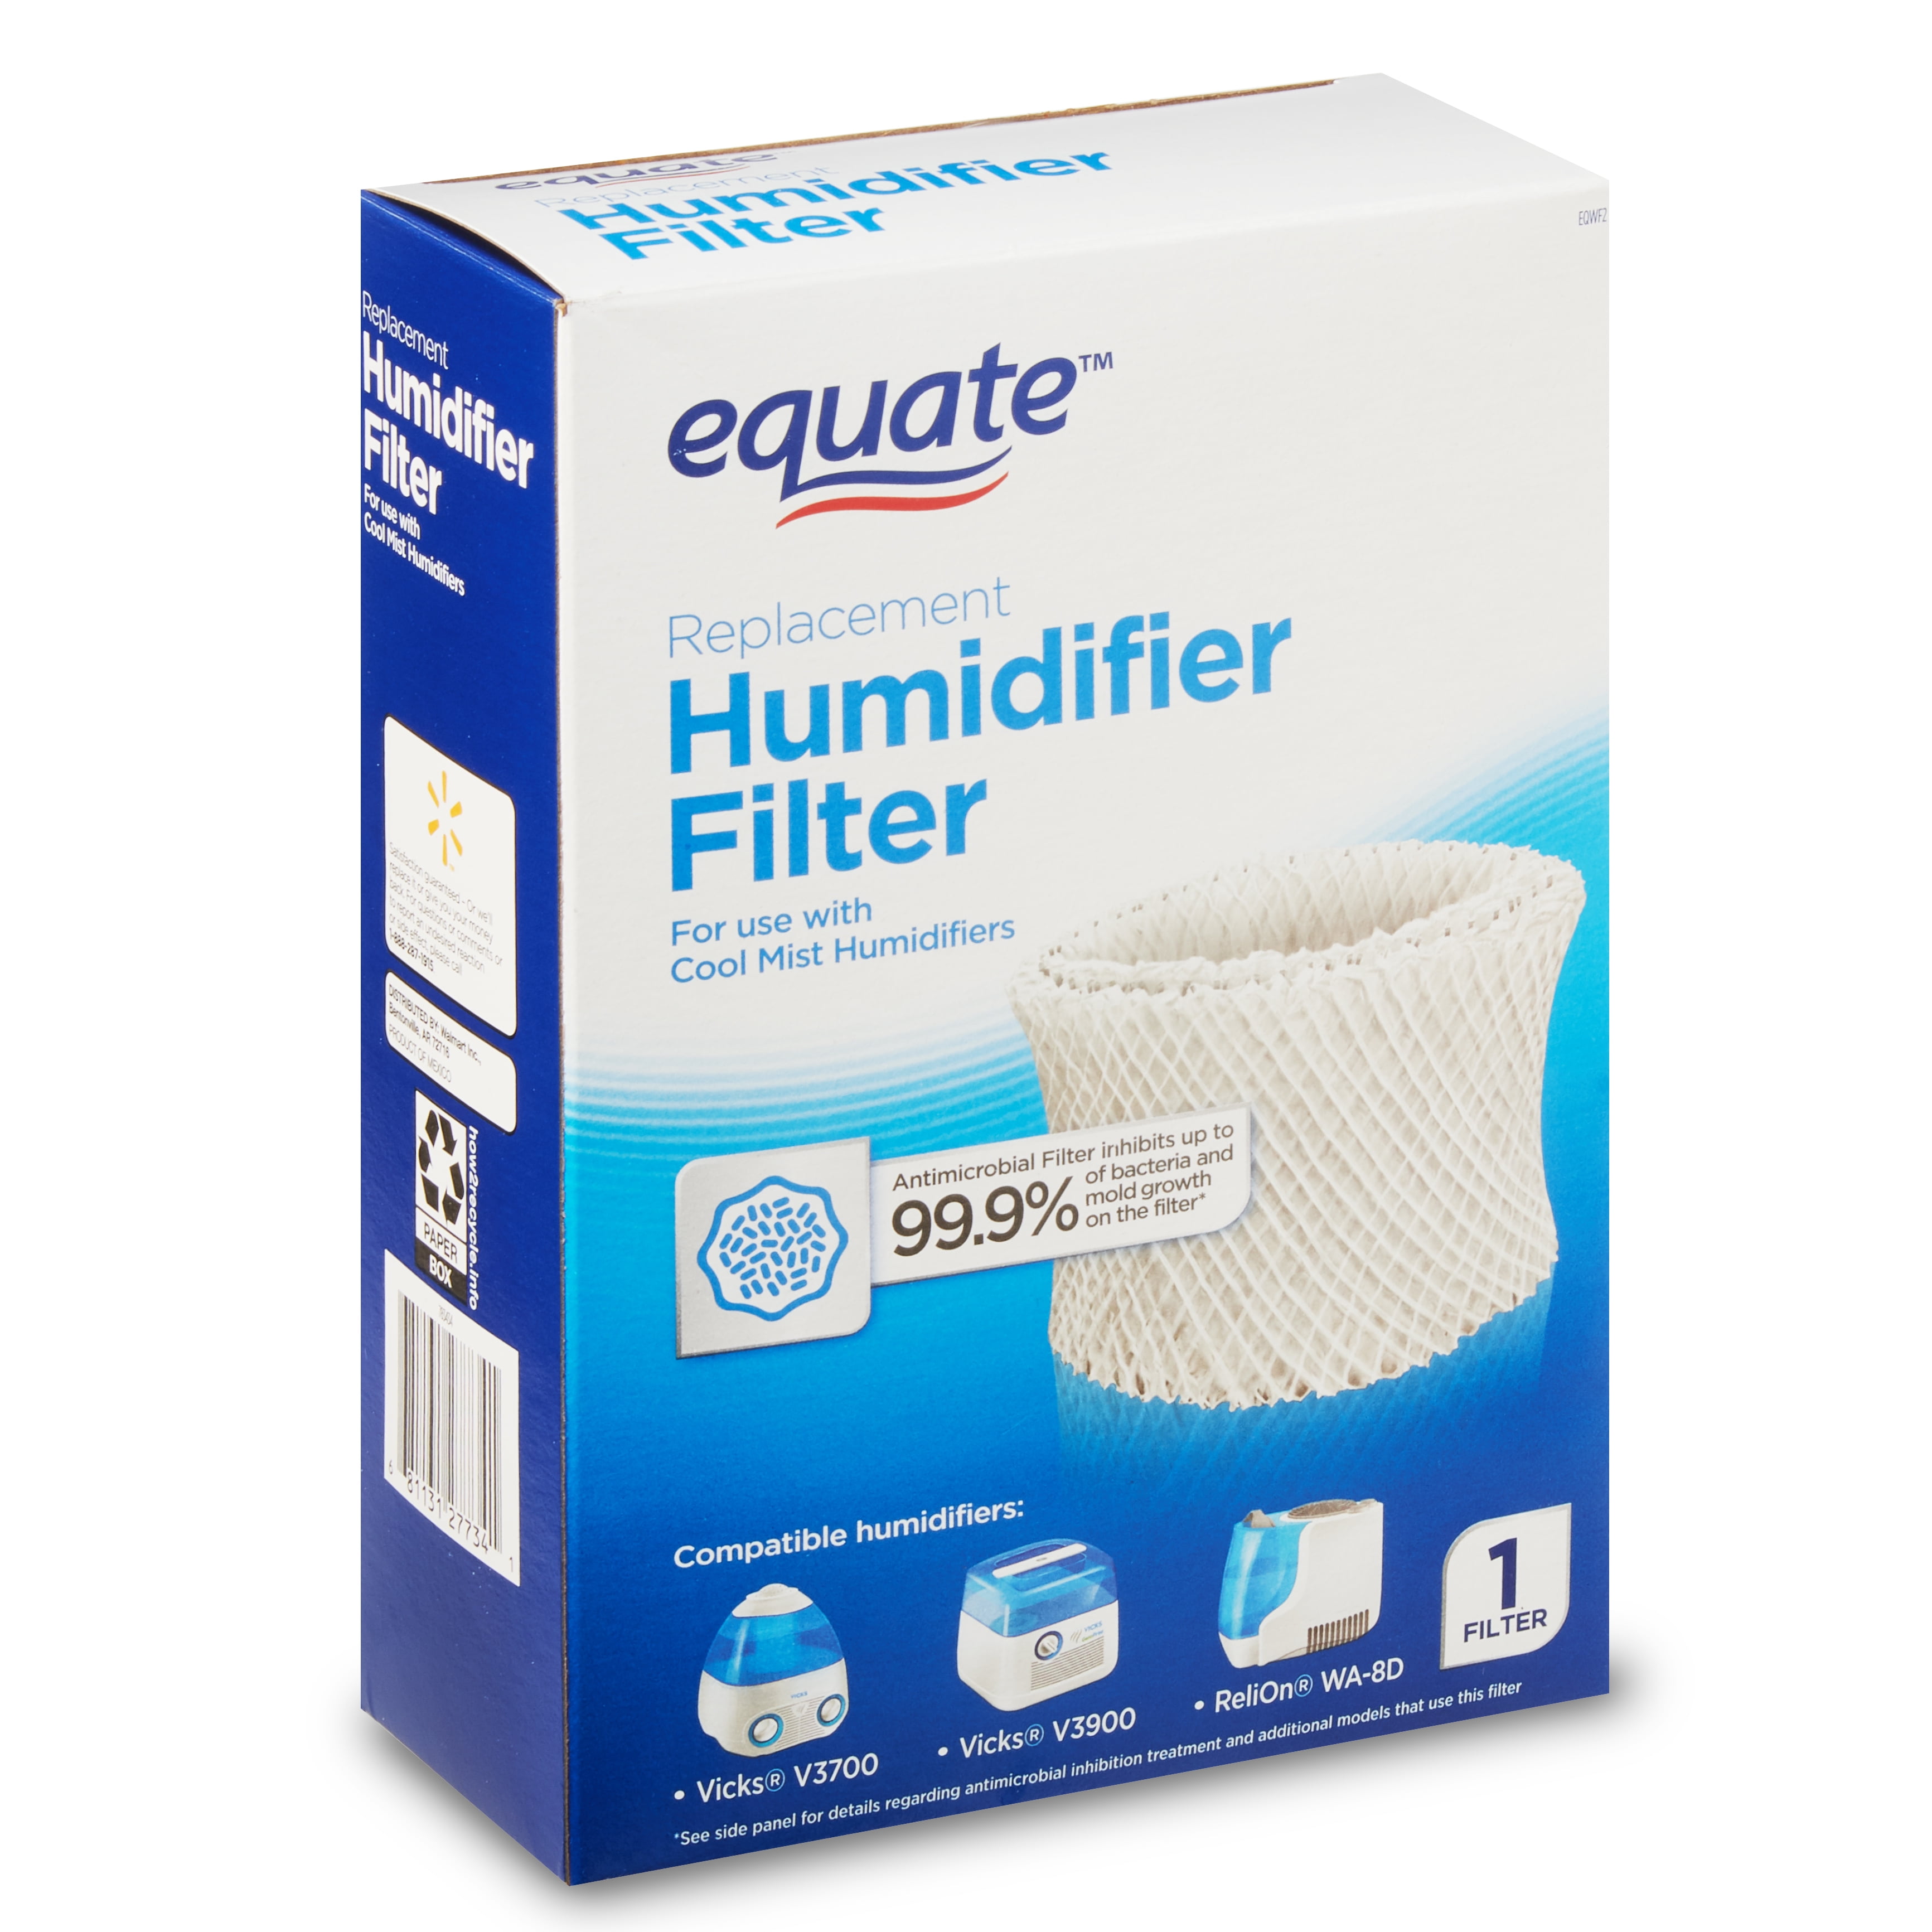 Equate Replacement Humidifier Filter for Use with Cool Mist Humidifiers for sale online 